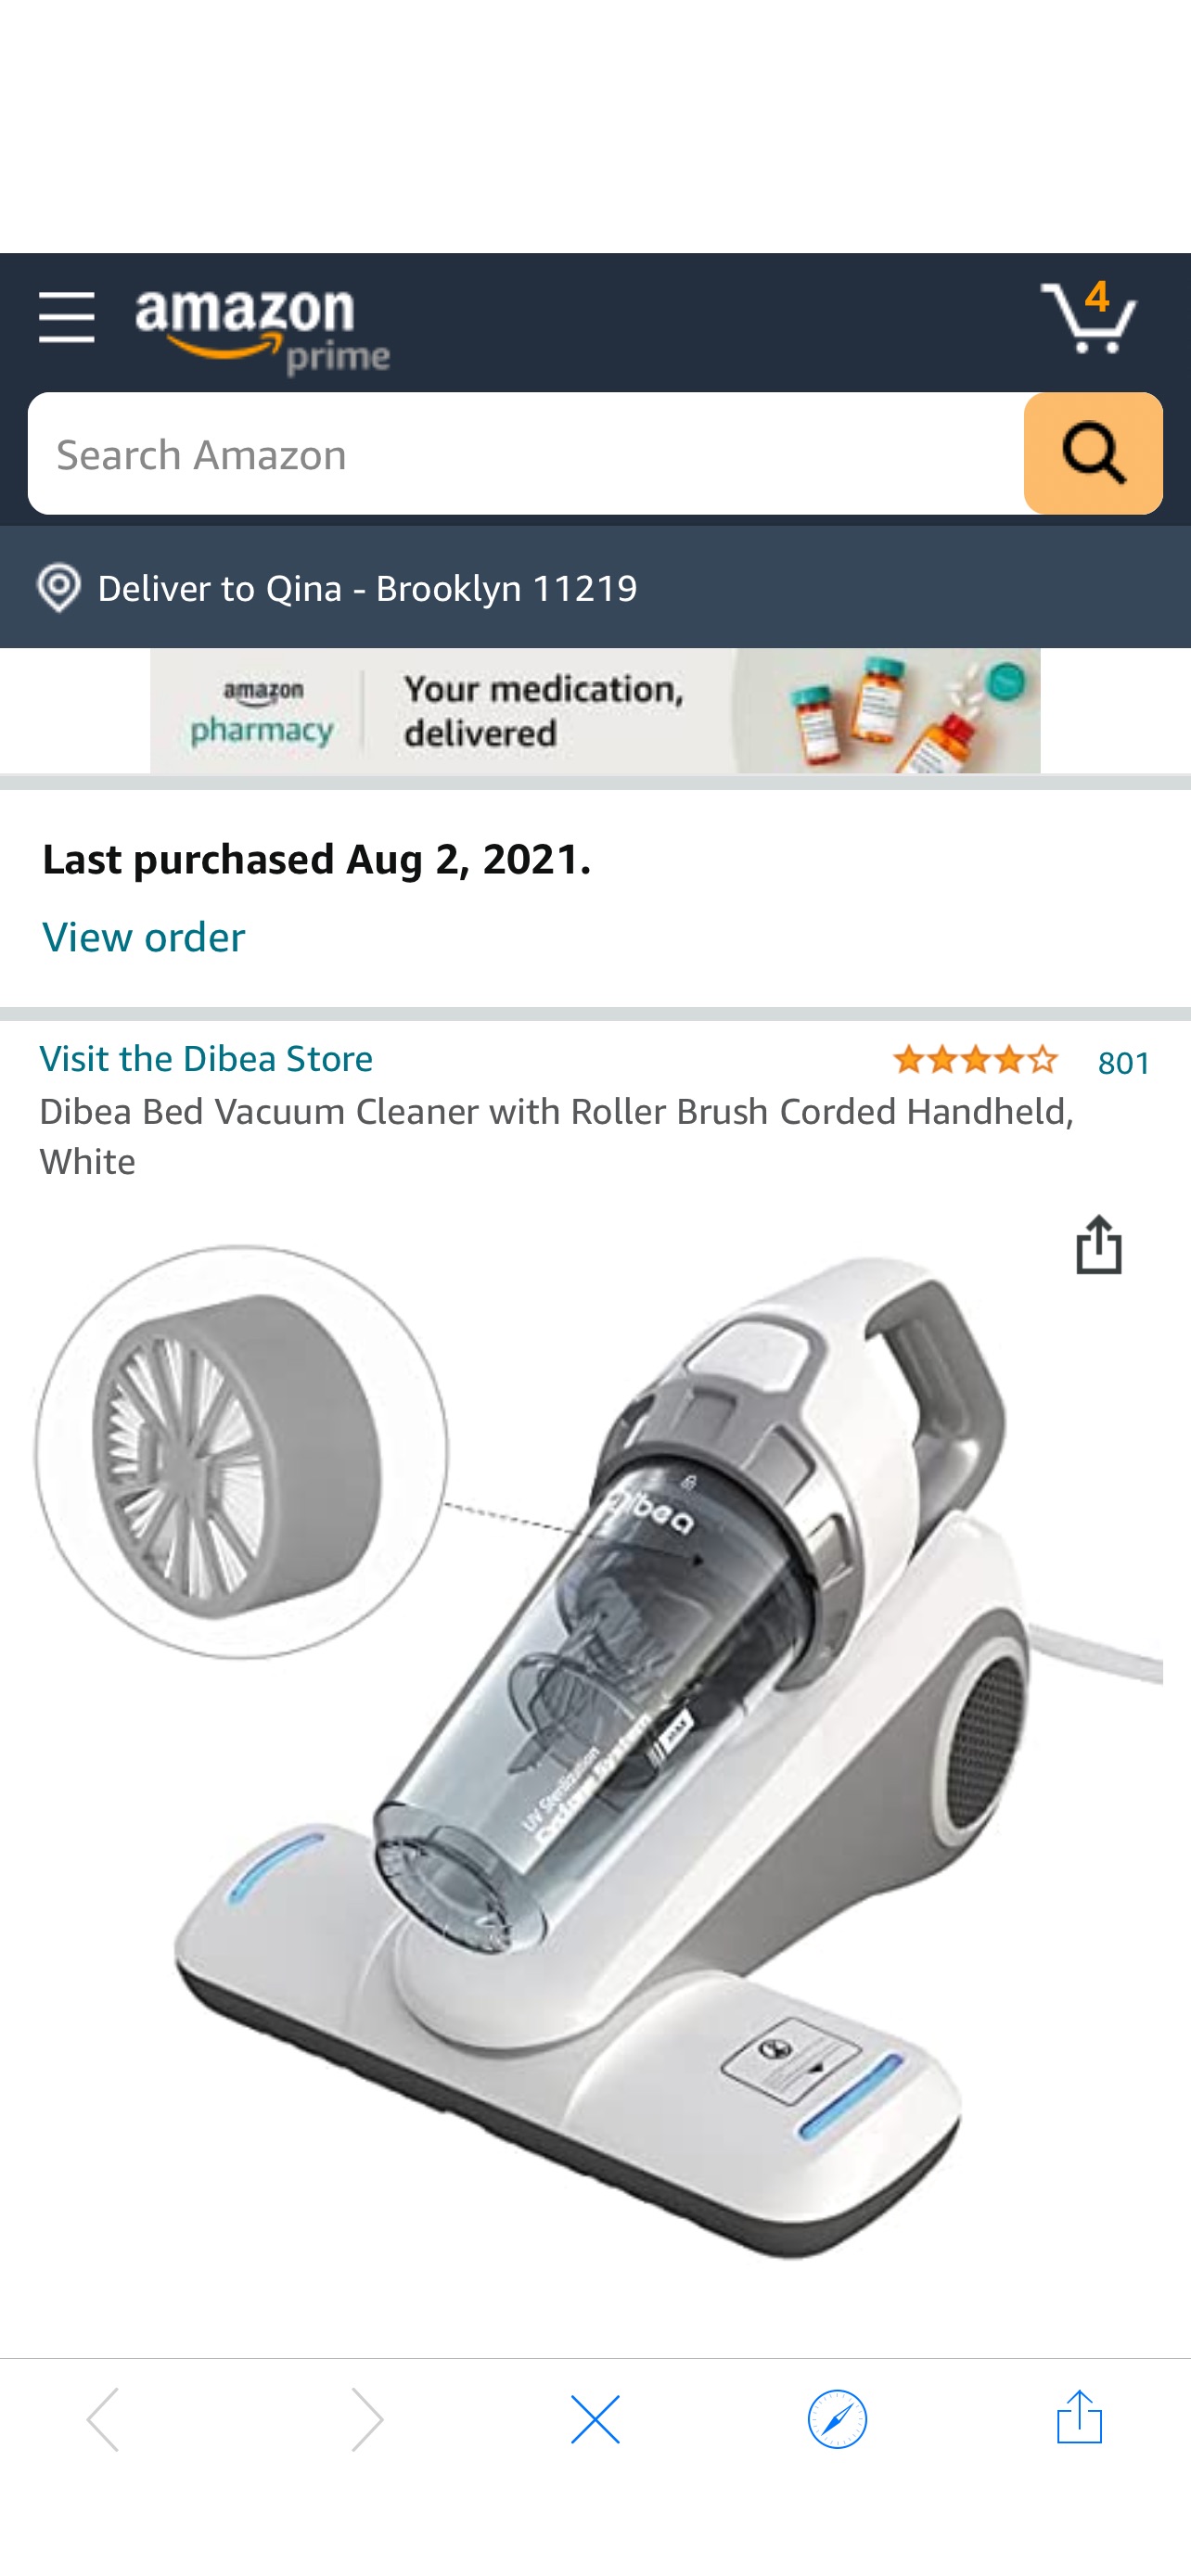 Amazon.com - Dibea Bed Vacuum Cleaner with Roller Brush Corded Handheld, White -床真空吸尘器